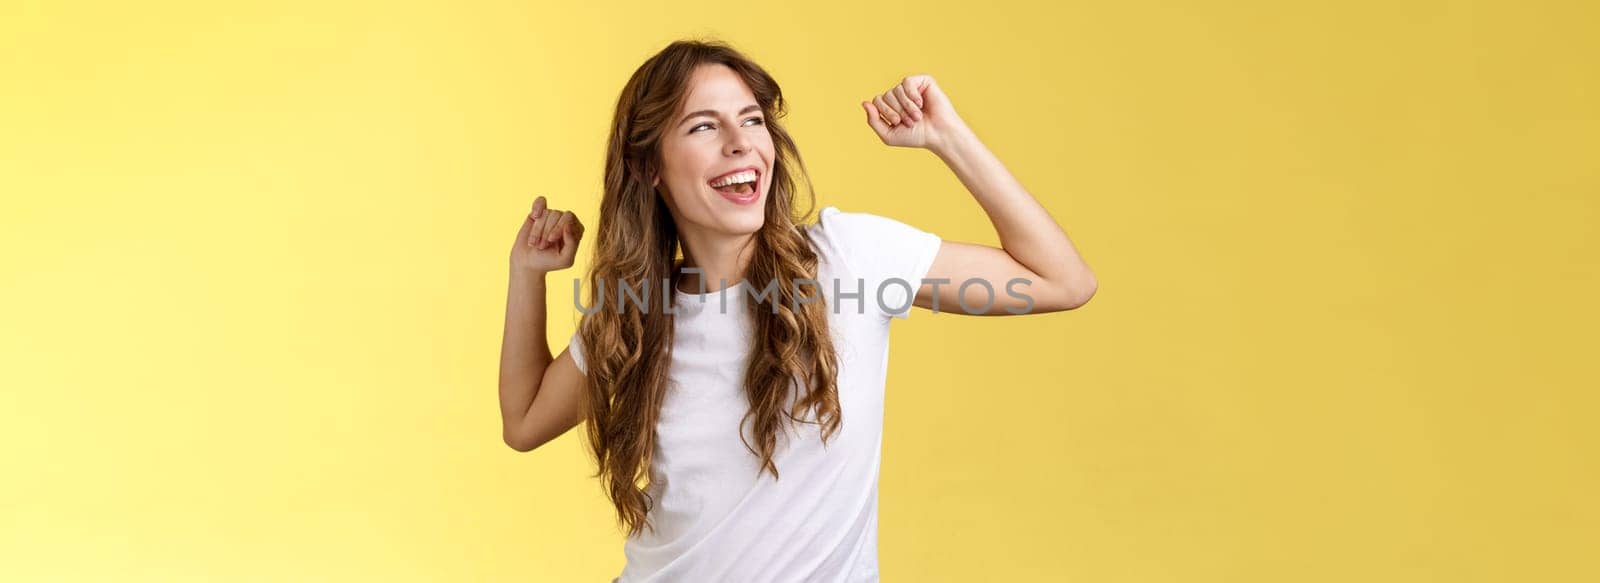 Yeah let perfect summer days behind. Daring good-looking happy charismatic young woman curly haircut gaze left pleased carefree having fun raise hands up celebratory victory winning success.